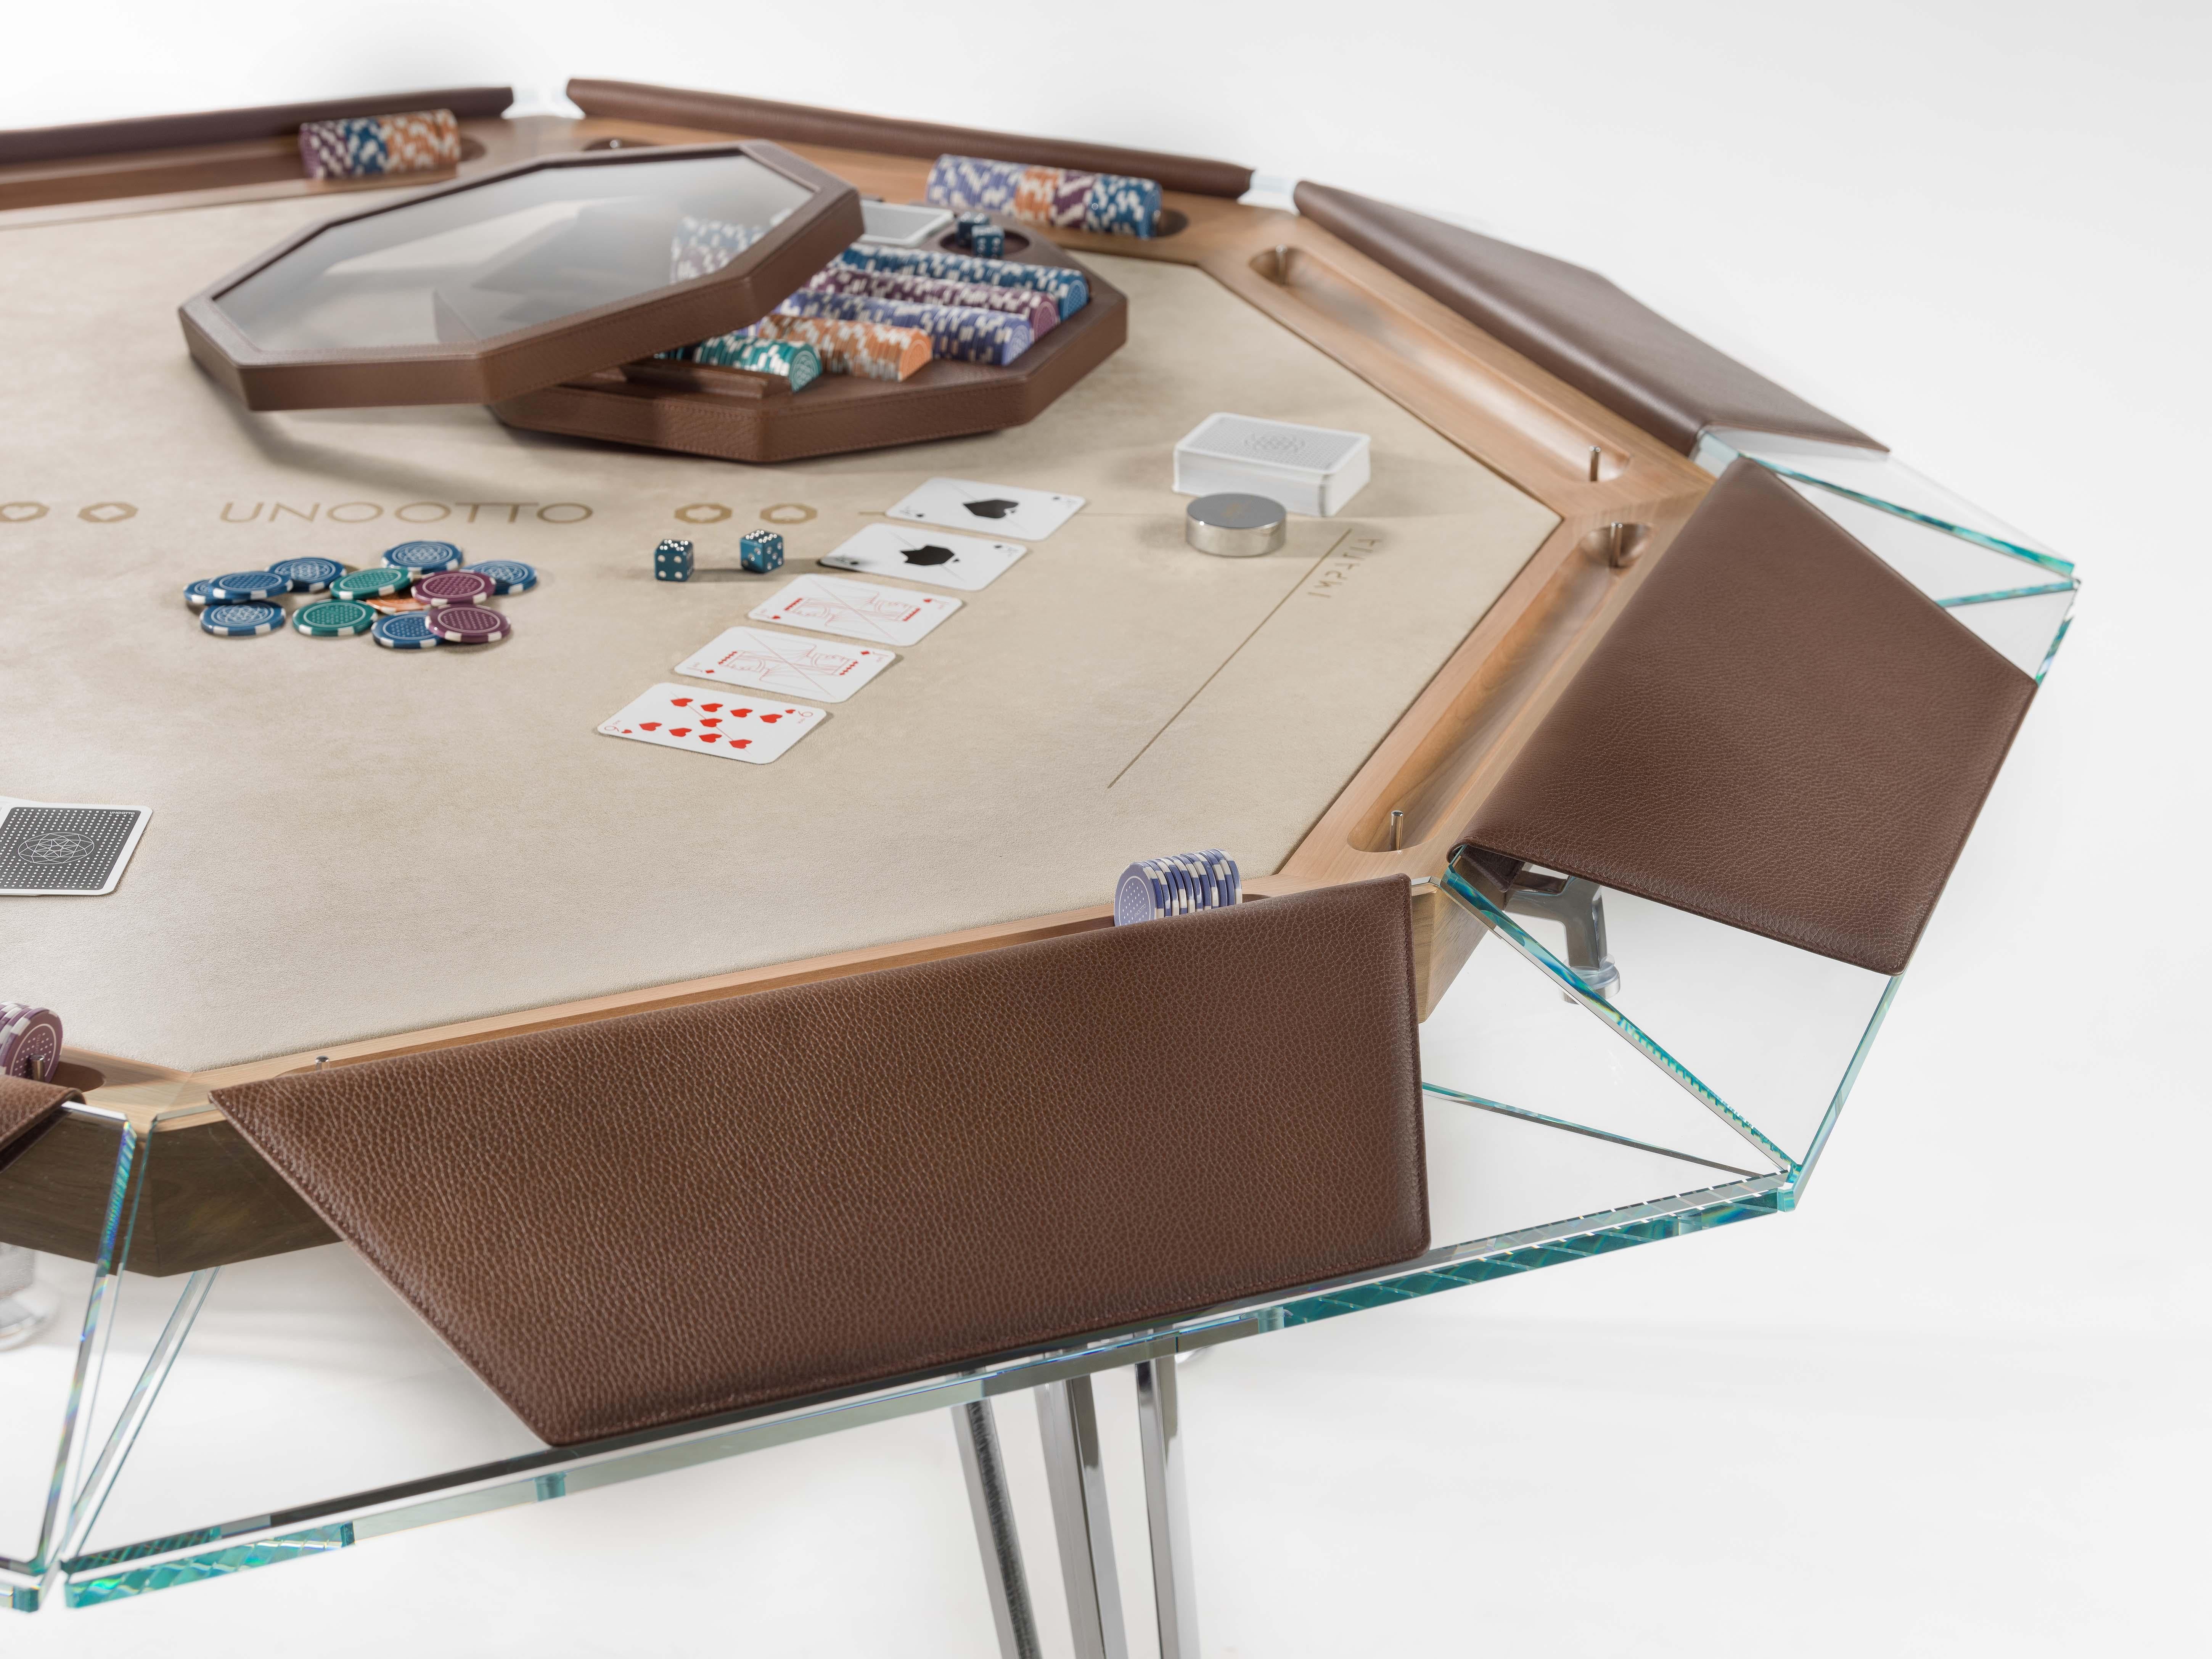 Unootto is the reinterpretation of the traditional professional poker table, making the A-game stylish and sophisticated.

This one-of-a-kind octagonal poker table features a unique low-iron glass top edge supported by an inner ashwood tabletop,